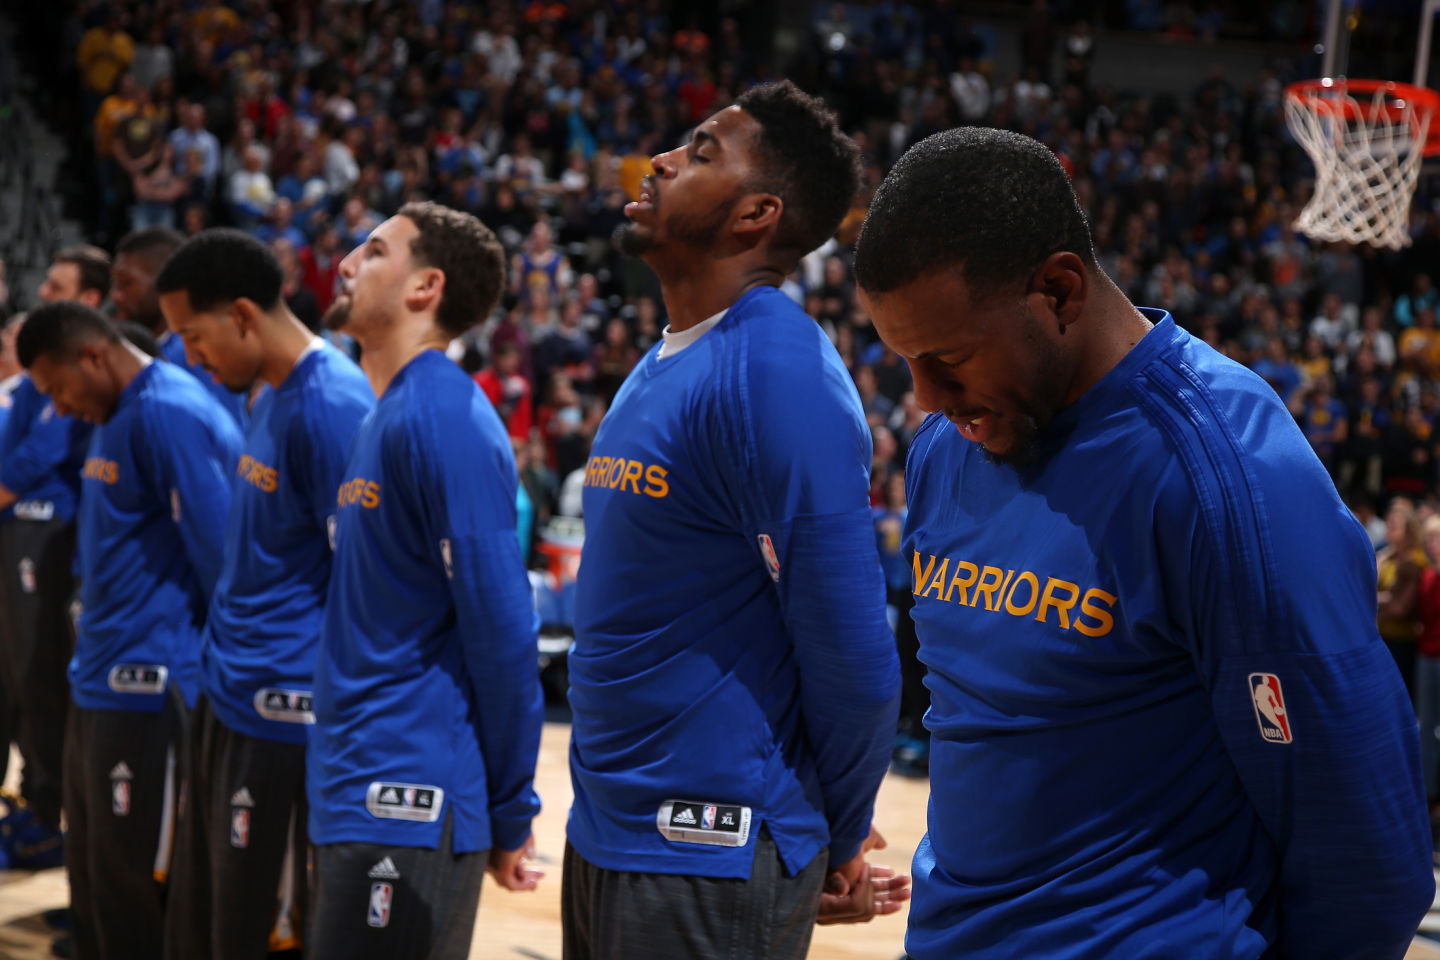 Andre Iguodala (R) and his teammates observe the national anthem prior to facing the Denver Nuggets Nov. 22, 2015. (Doug Pensinger/Getty Images)